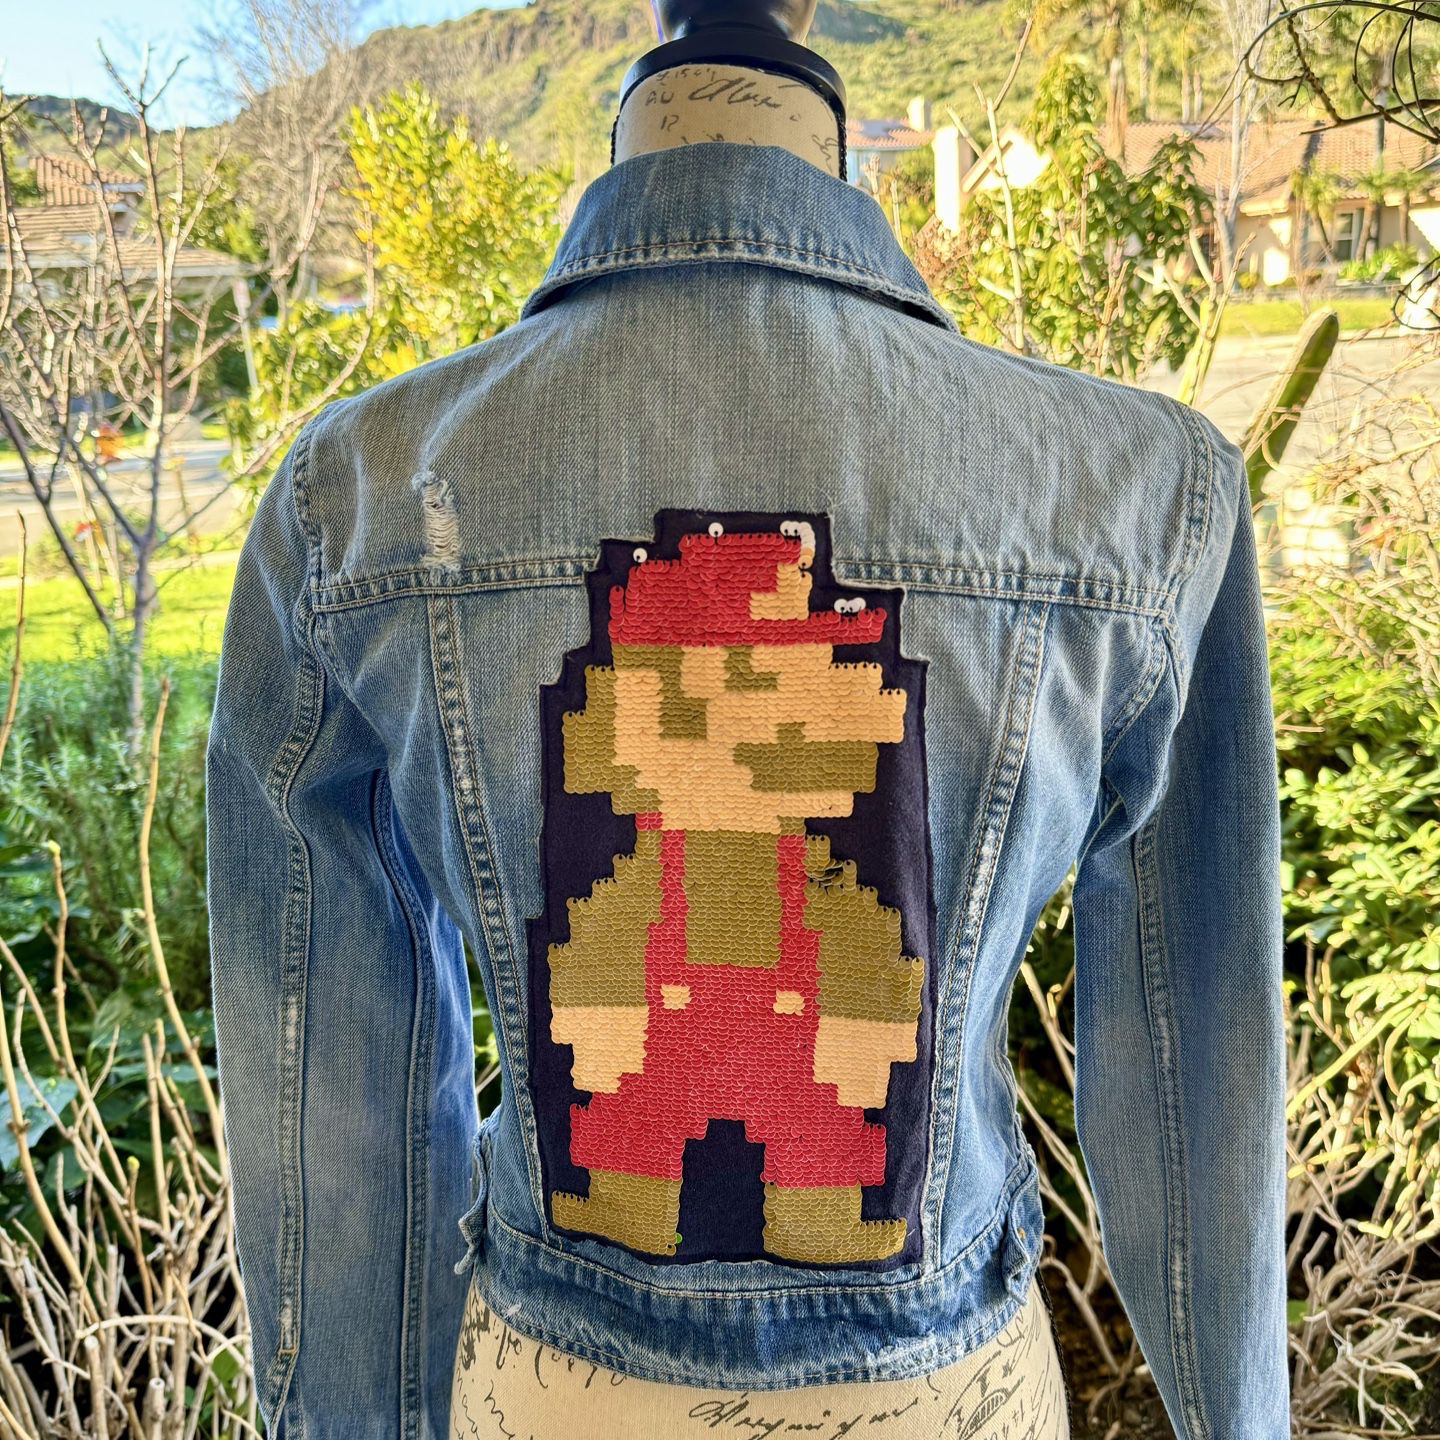 Mario/Nintendo Denim Jean Jacket With Reversible Sequins That Turns Into Another Character